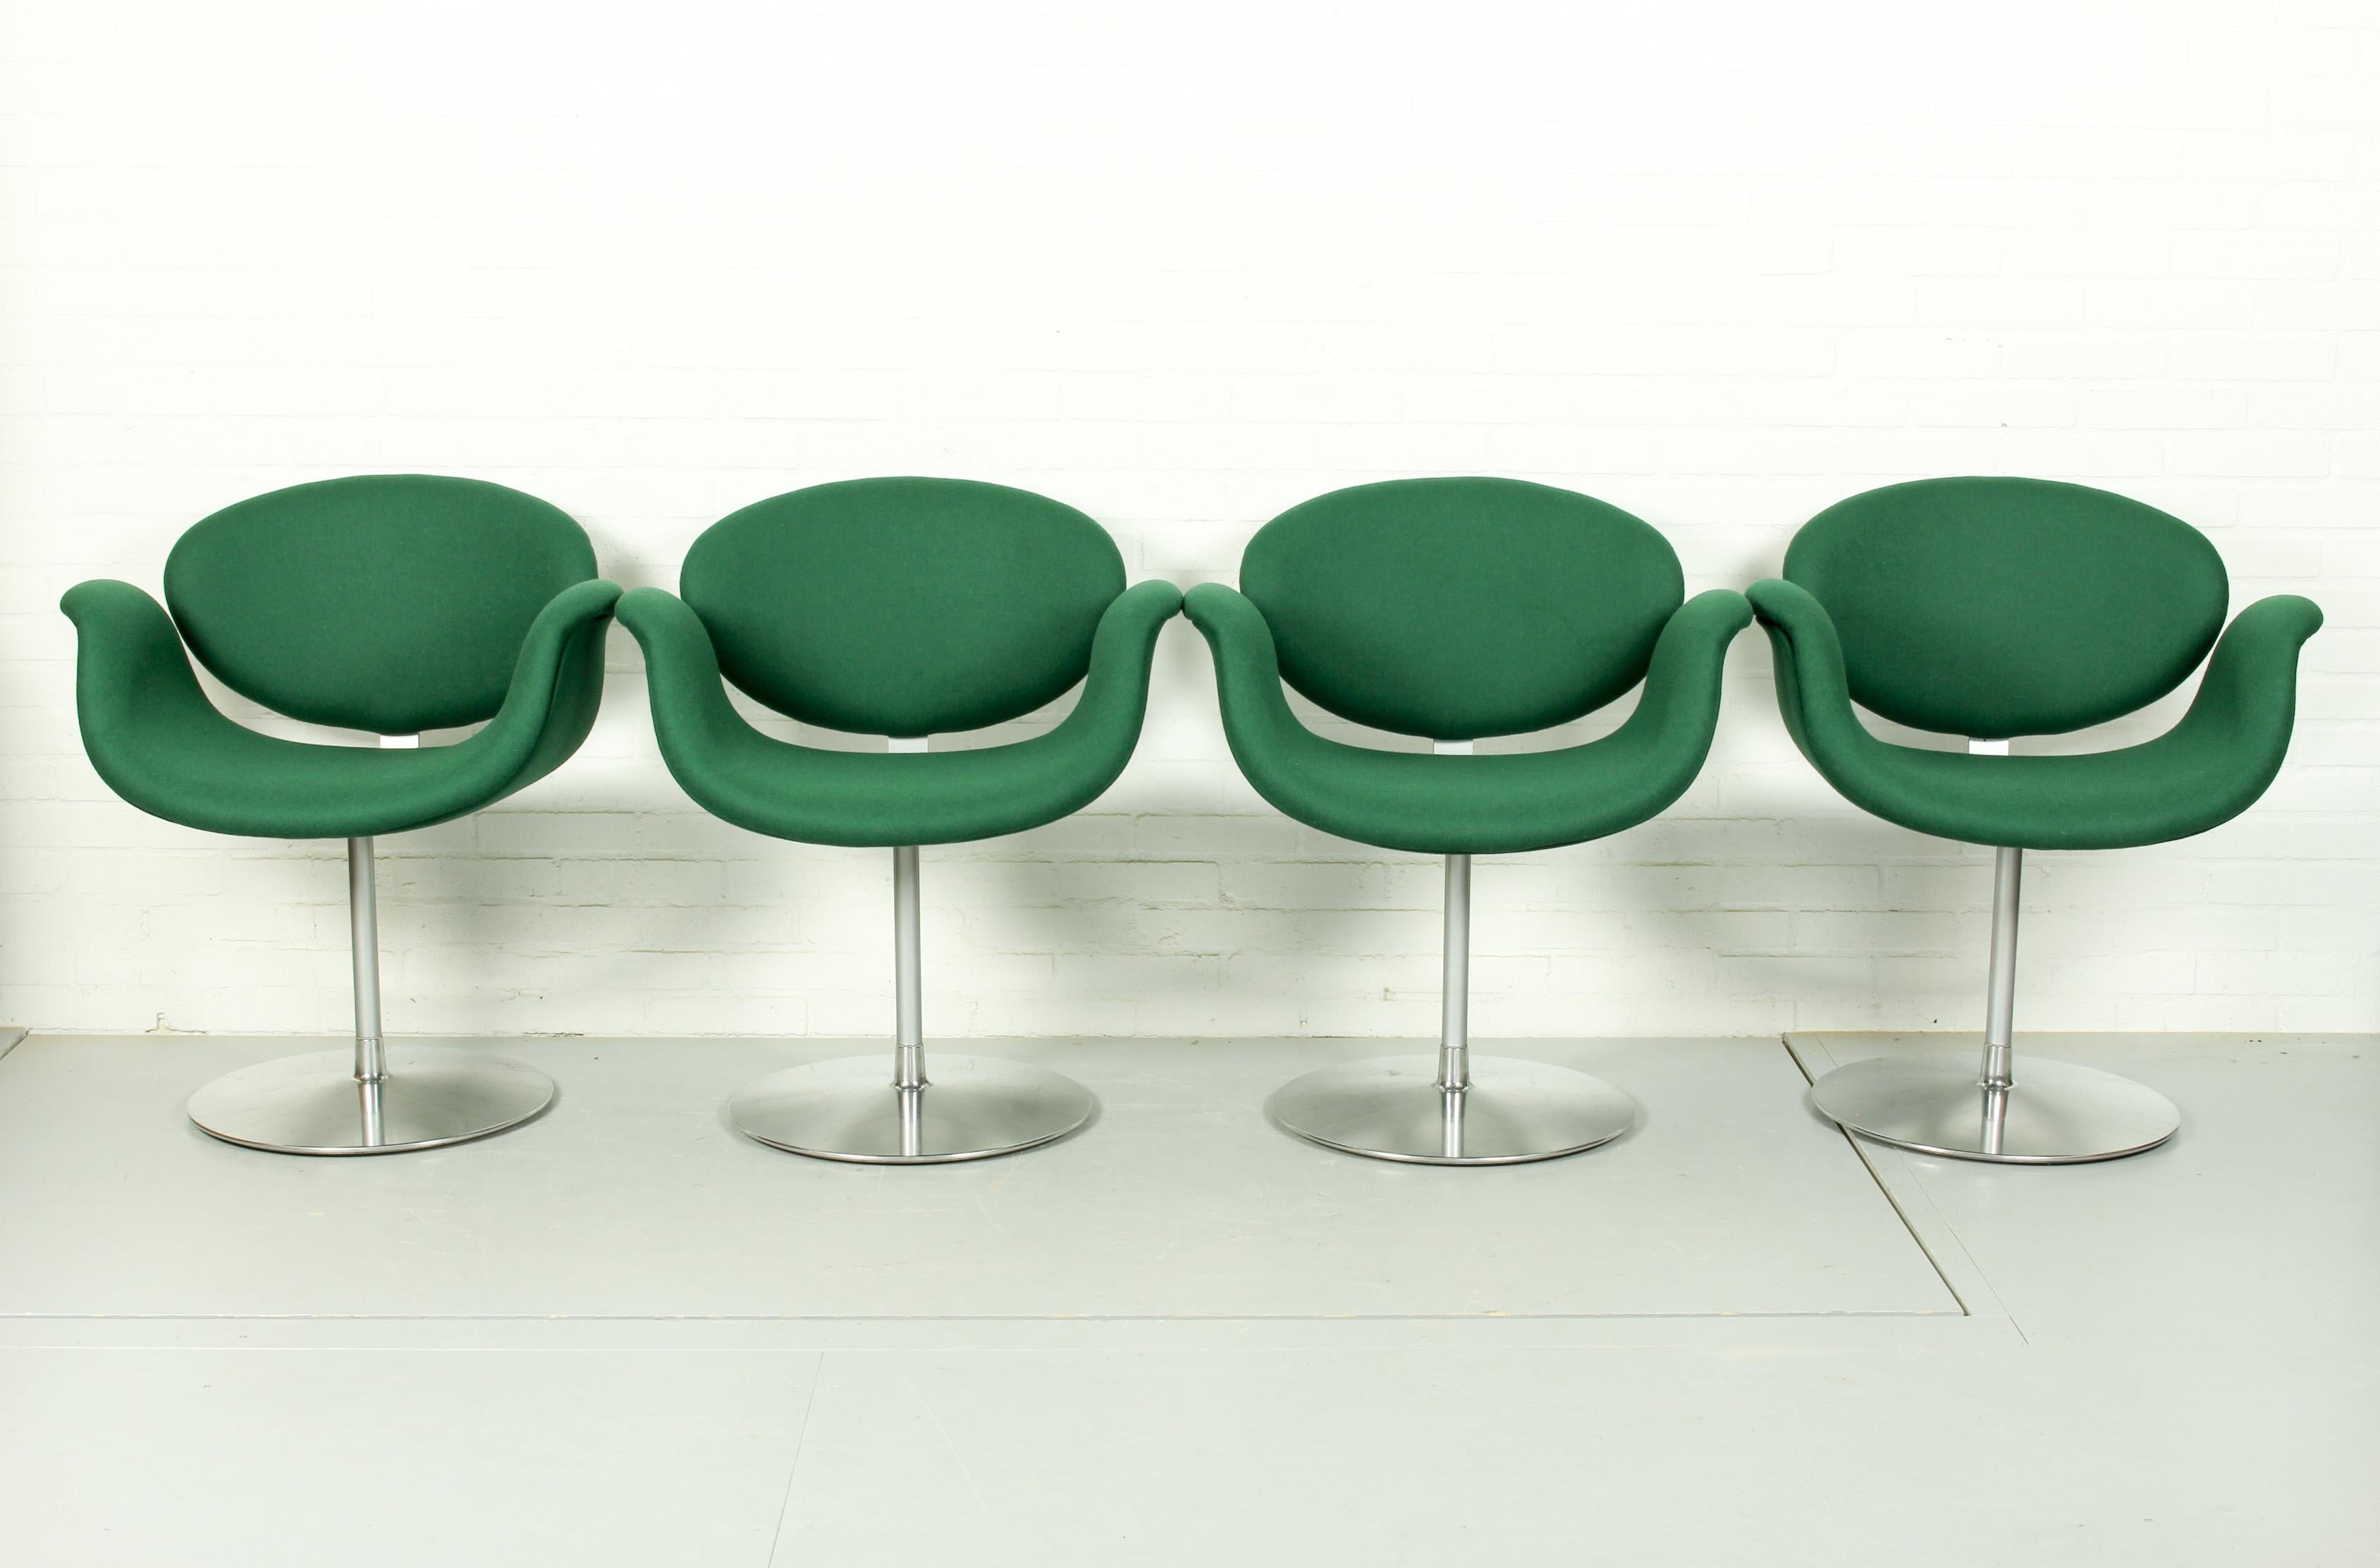 Set of 4 very comfortable pivoting armchairs, designed by the famous Pierre Paulin in the 1960s. Fabricated by Artifort in the 1980s. Round metal base with a wooden frame, new upholstery with lovely and soft Camira green wool fabric. The chairs are